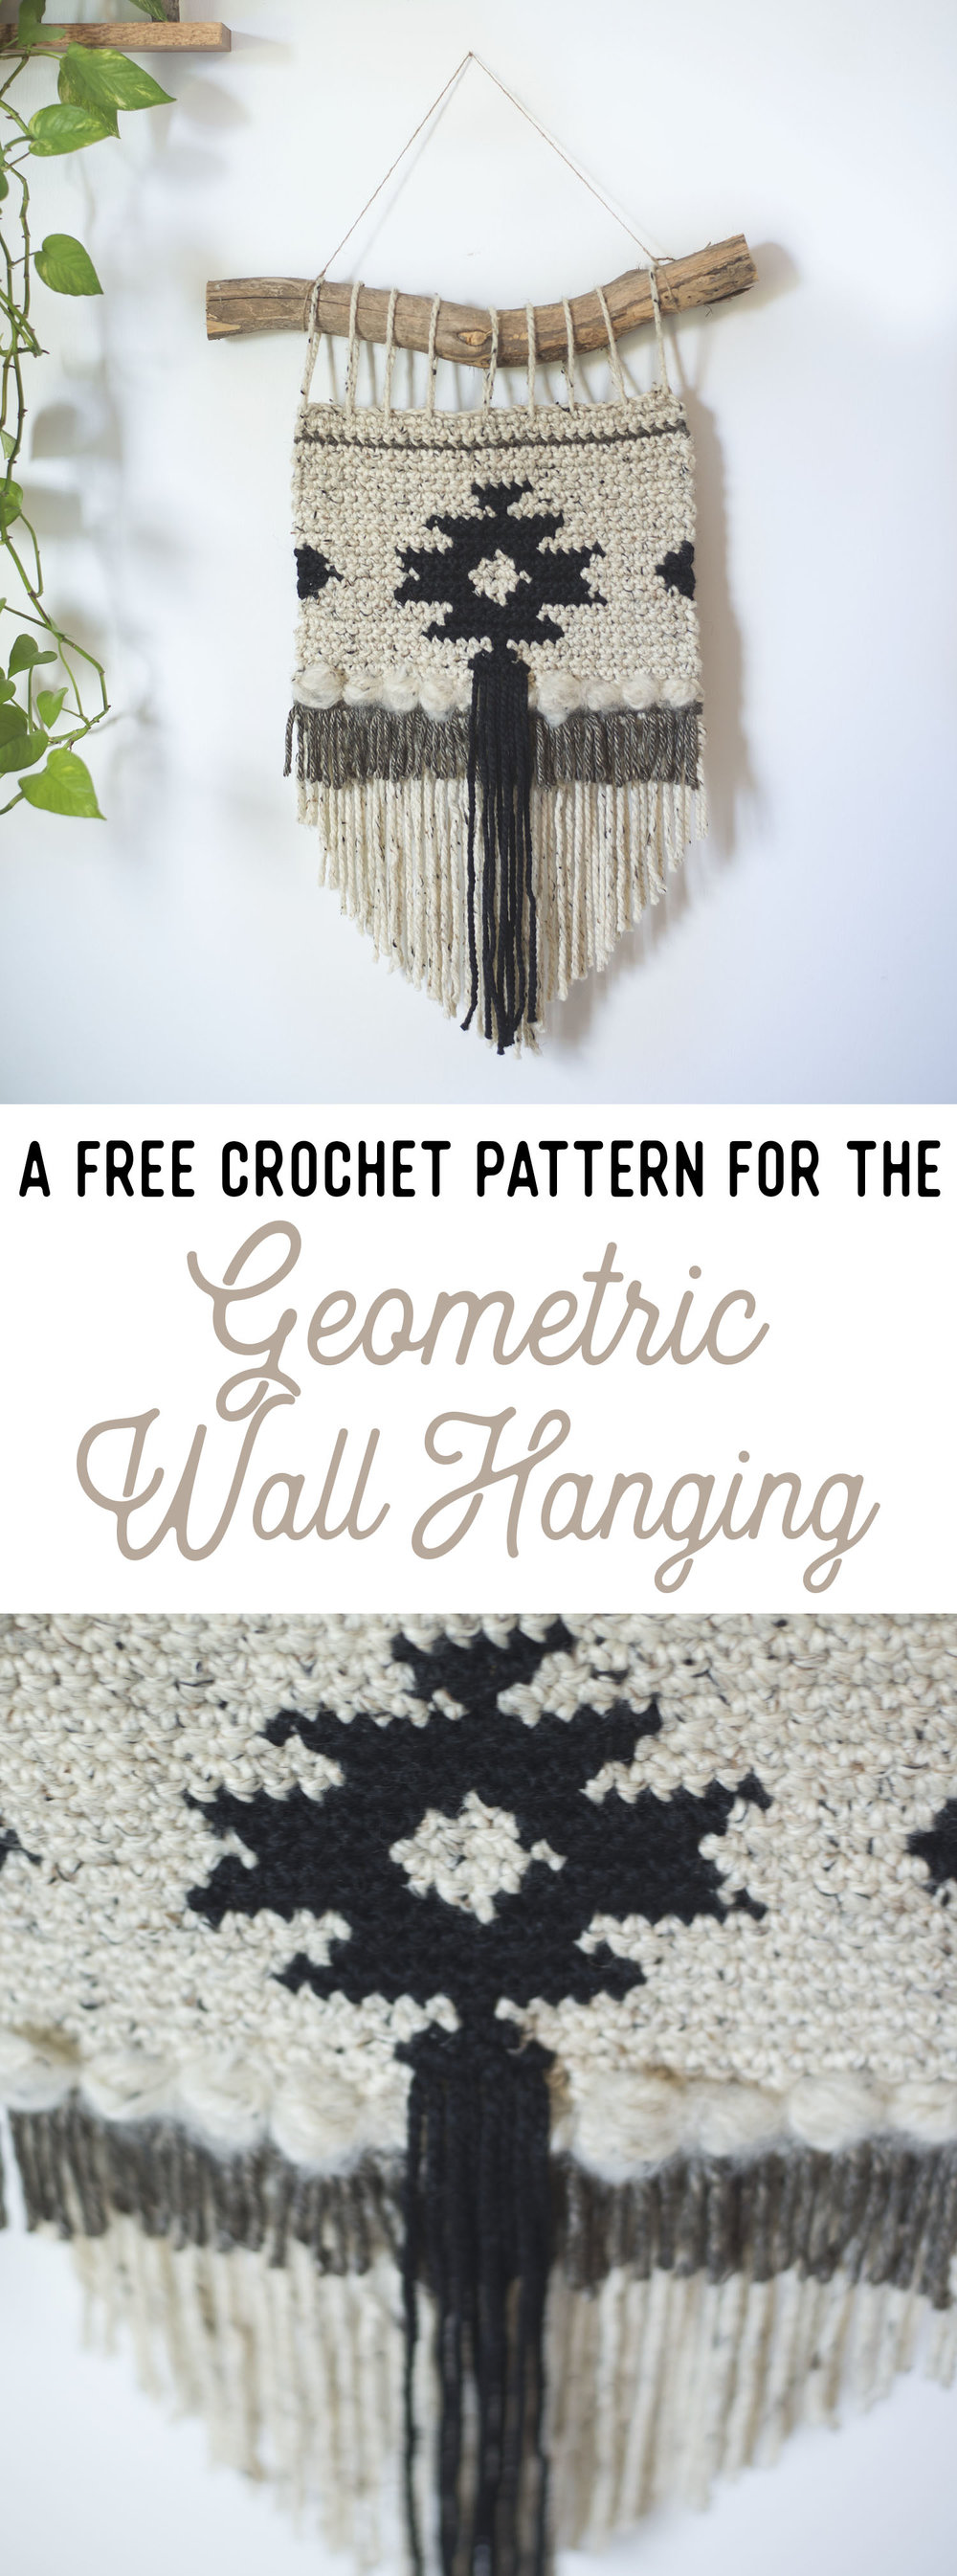 Geometric Wall Hanging | by Meg Made With Love